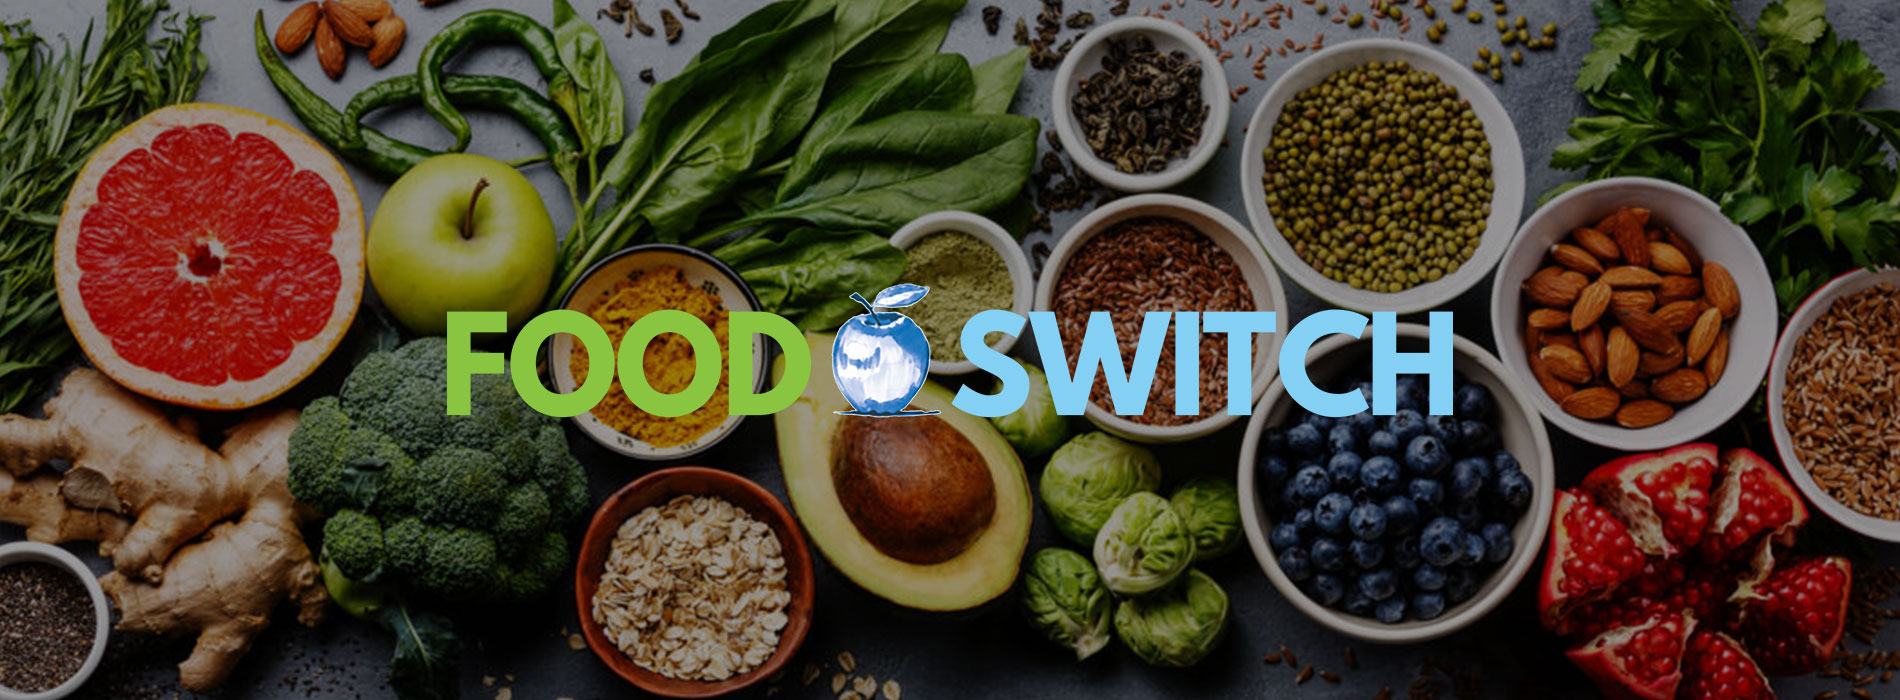 Food SWITCH particlier